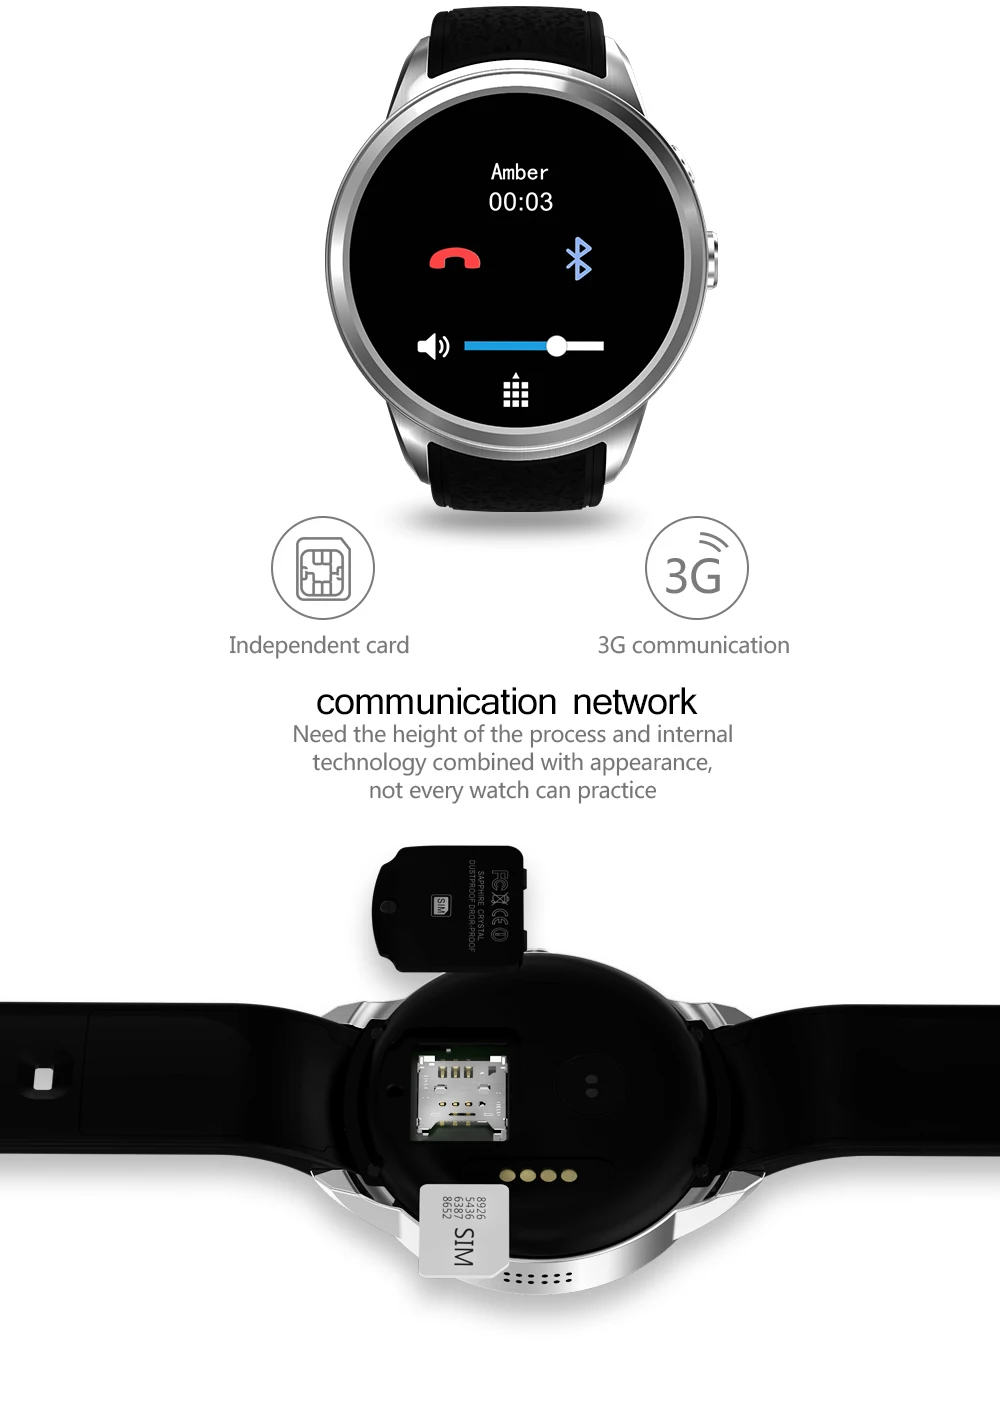 Smartch Smart watch X200 Android 5.1 1+16GB IP67 waterproof Smartwatch Support 3G WIFI GPS Nano SIM card Heart Rate 2.0 Camera |